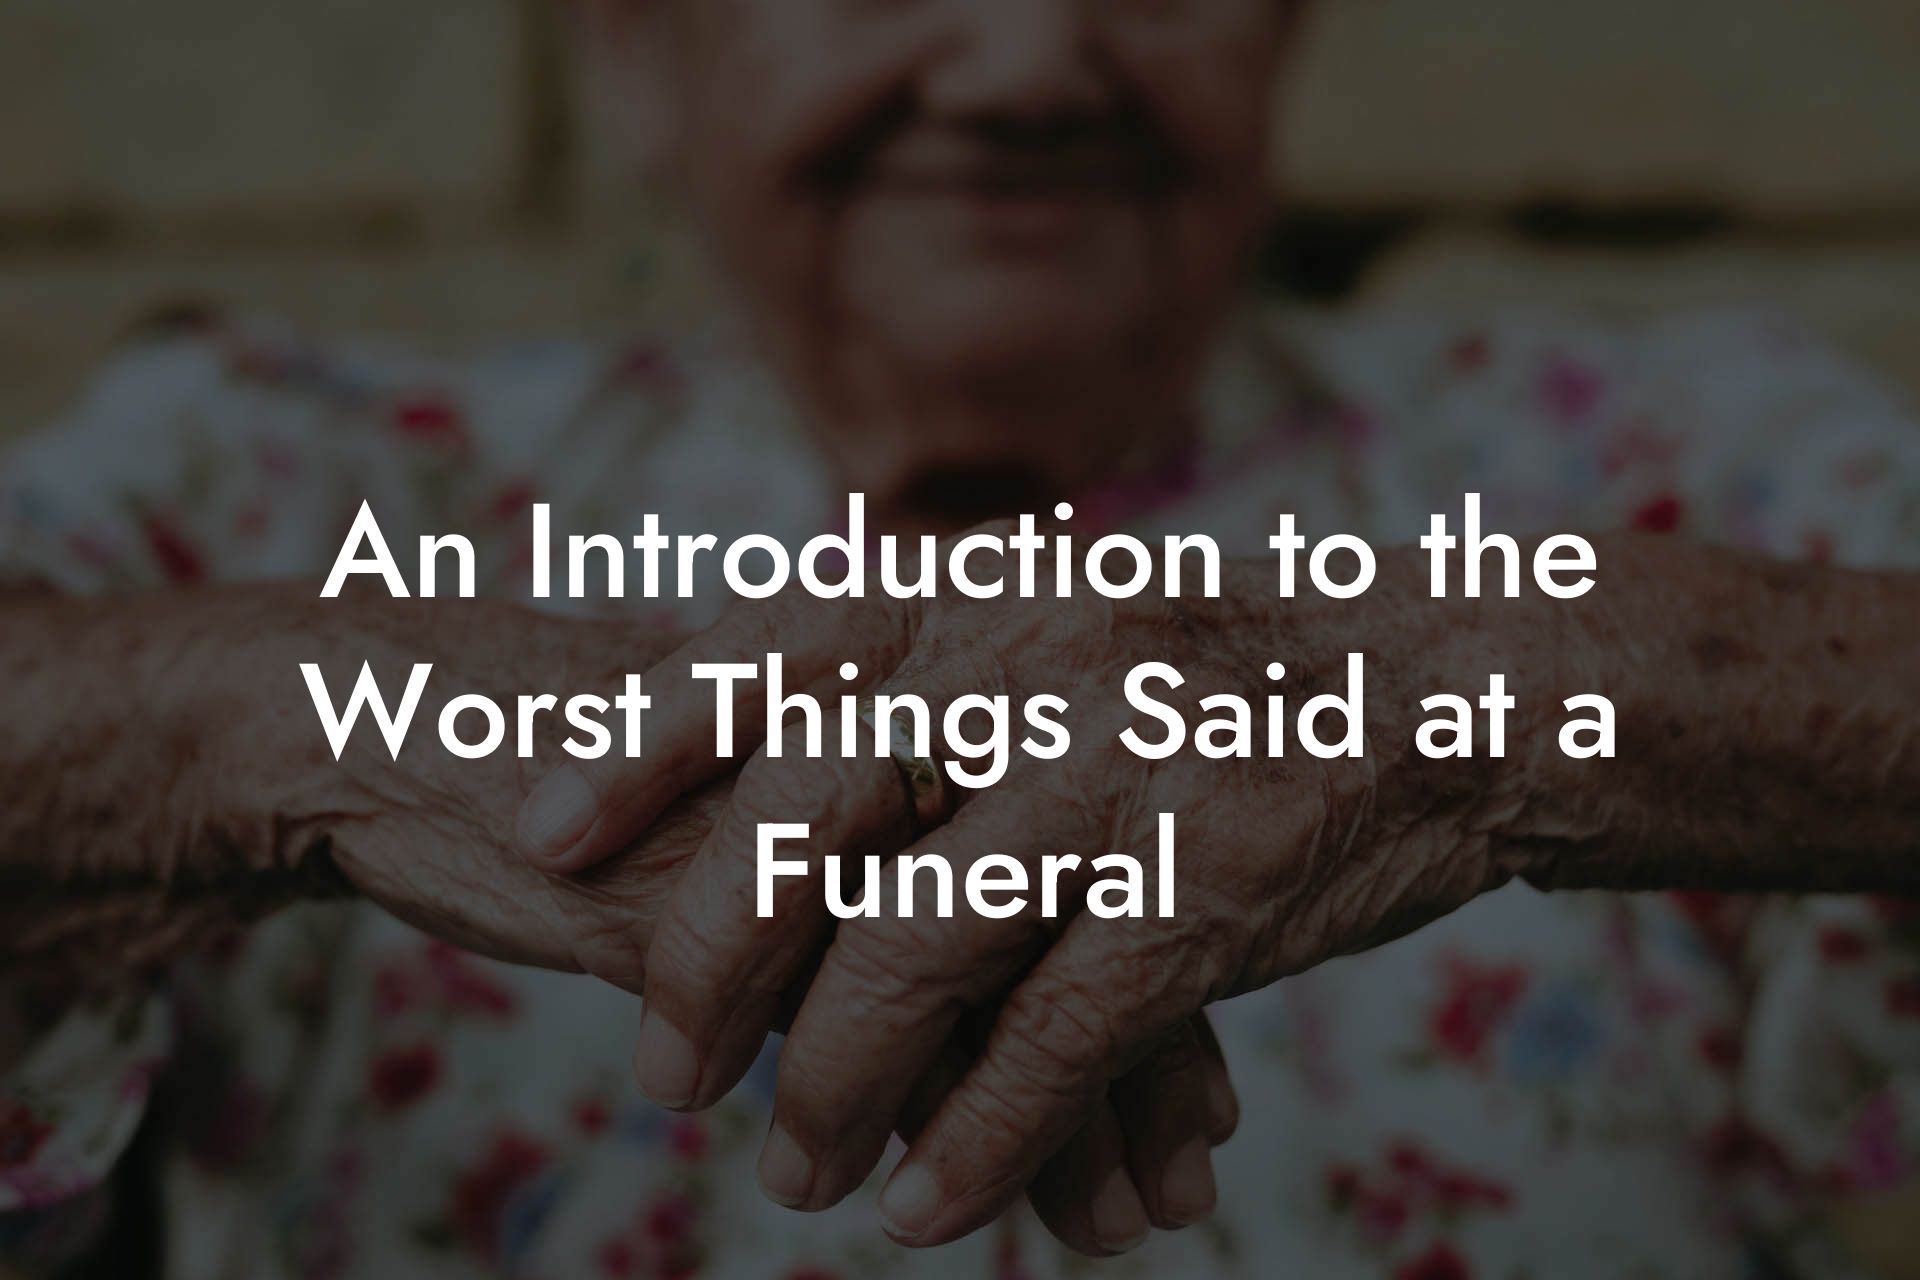 An Introduction to the Worst Things Said at a Funeral